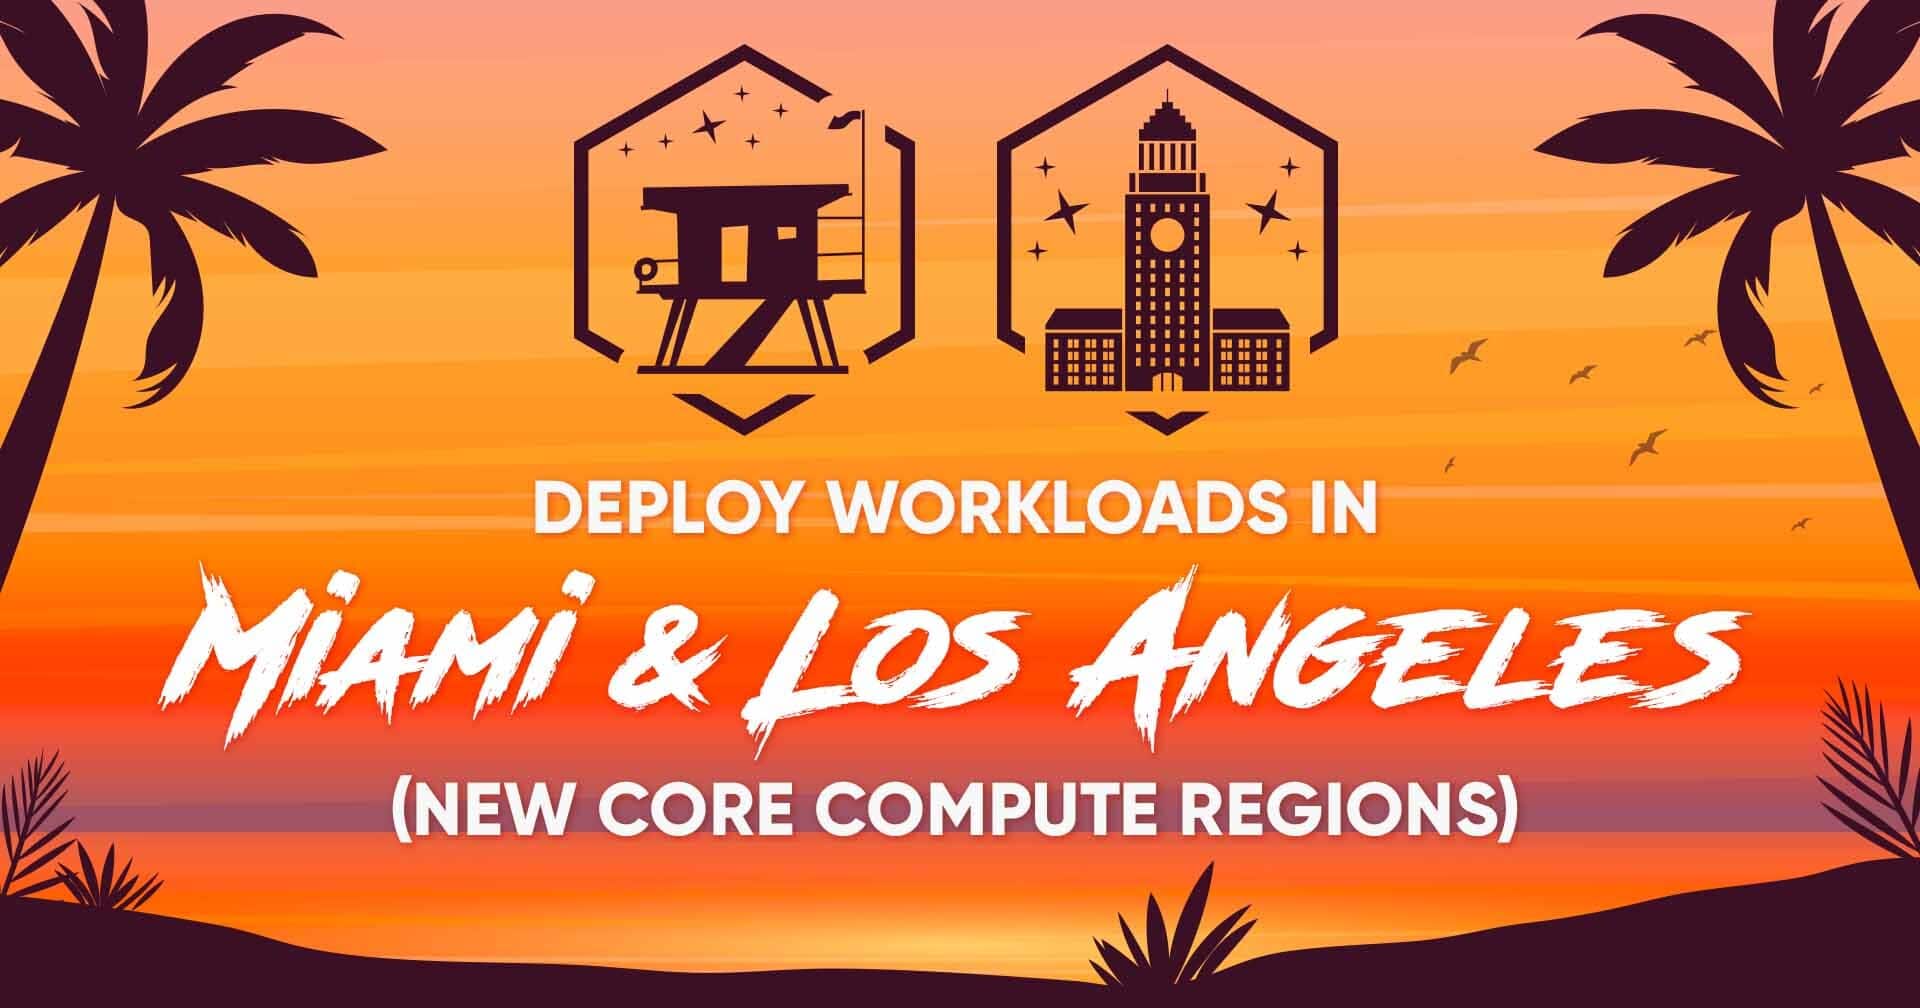 Deploy Workloads in Miami and Los Angeles with New Core Compute Regions!